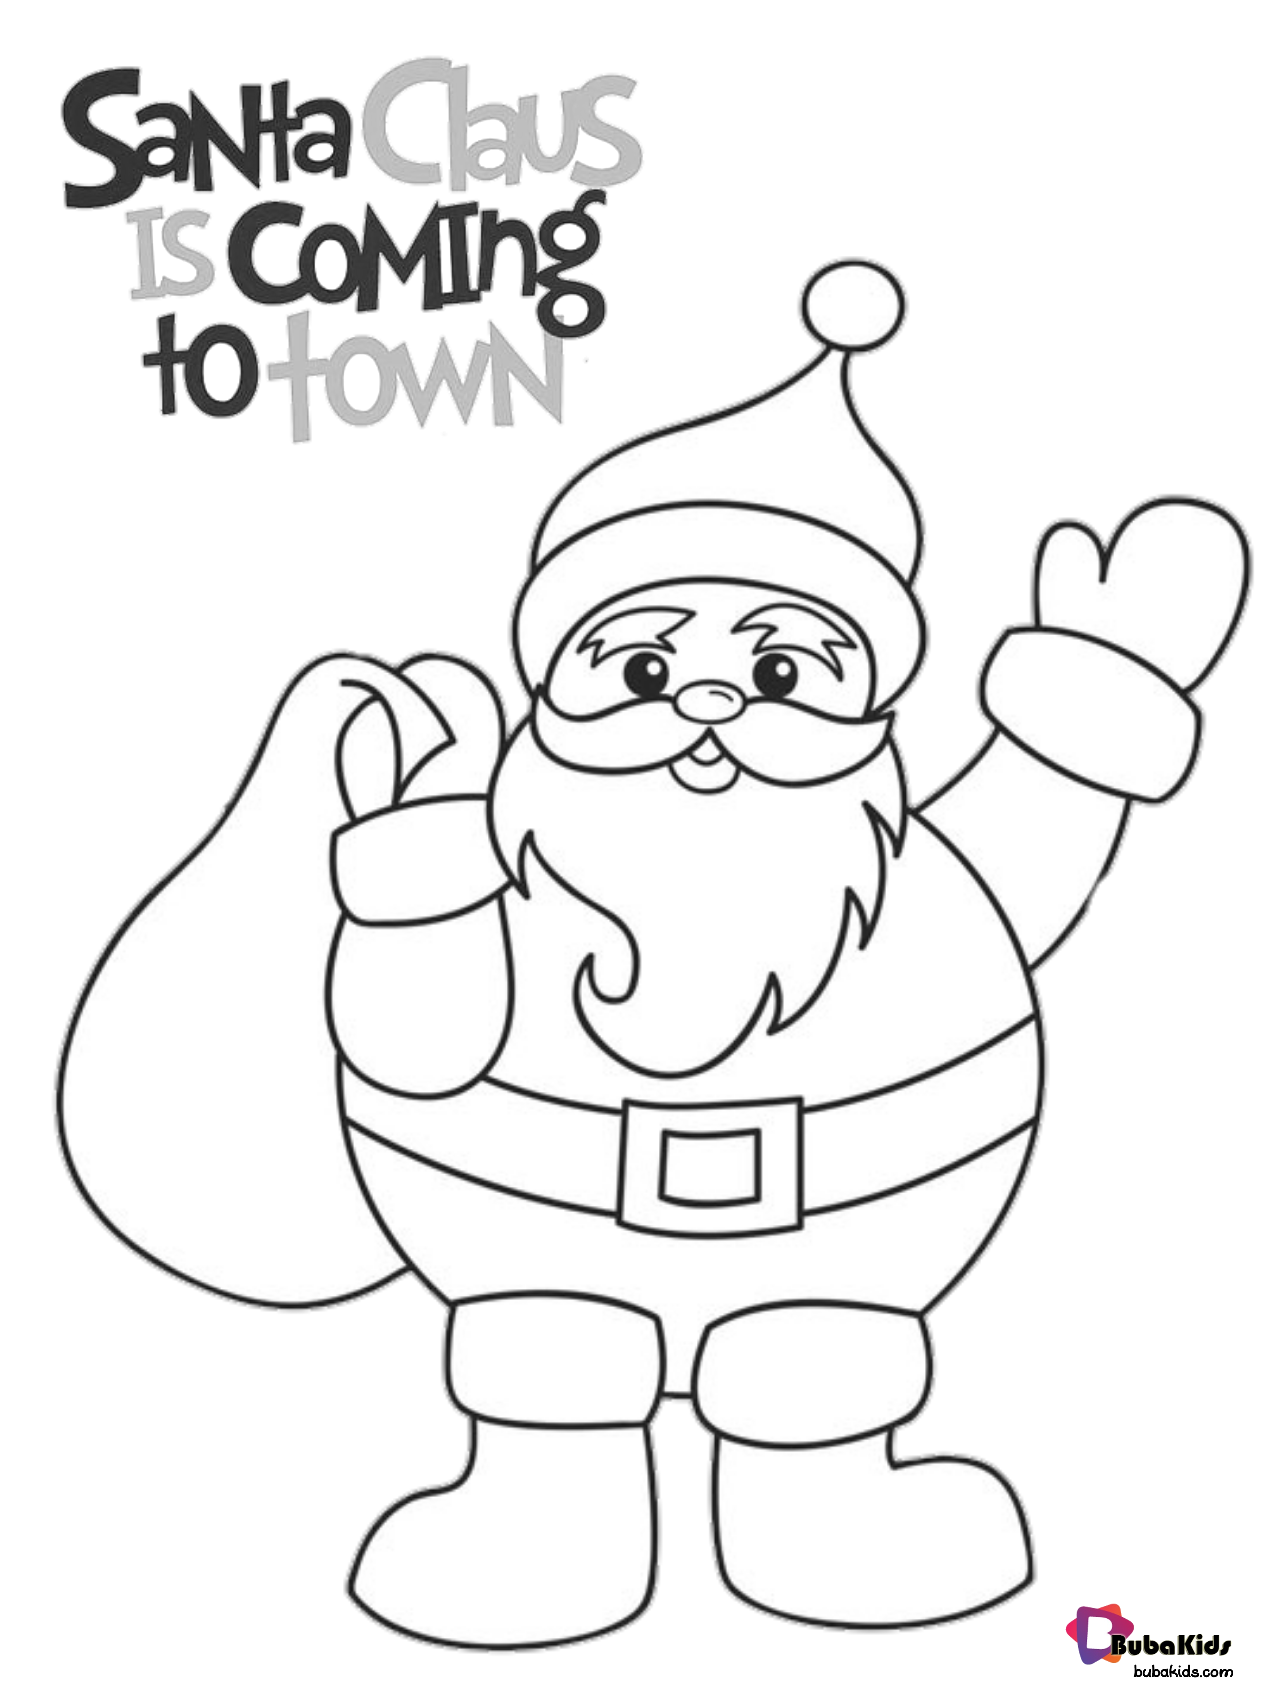 Santa Claus is coming to town christmas coloring page. Wallpaper